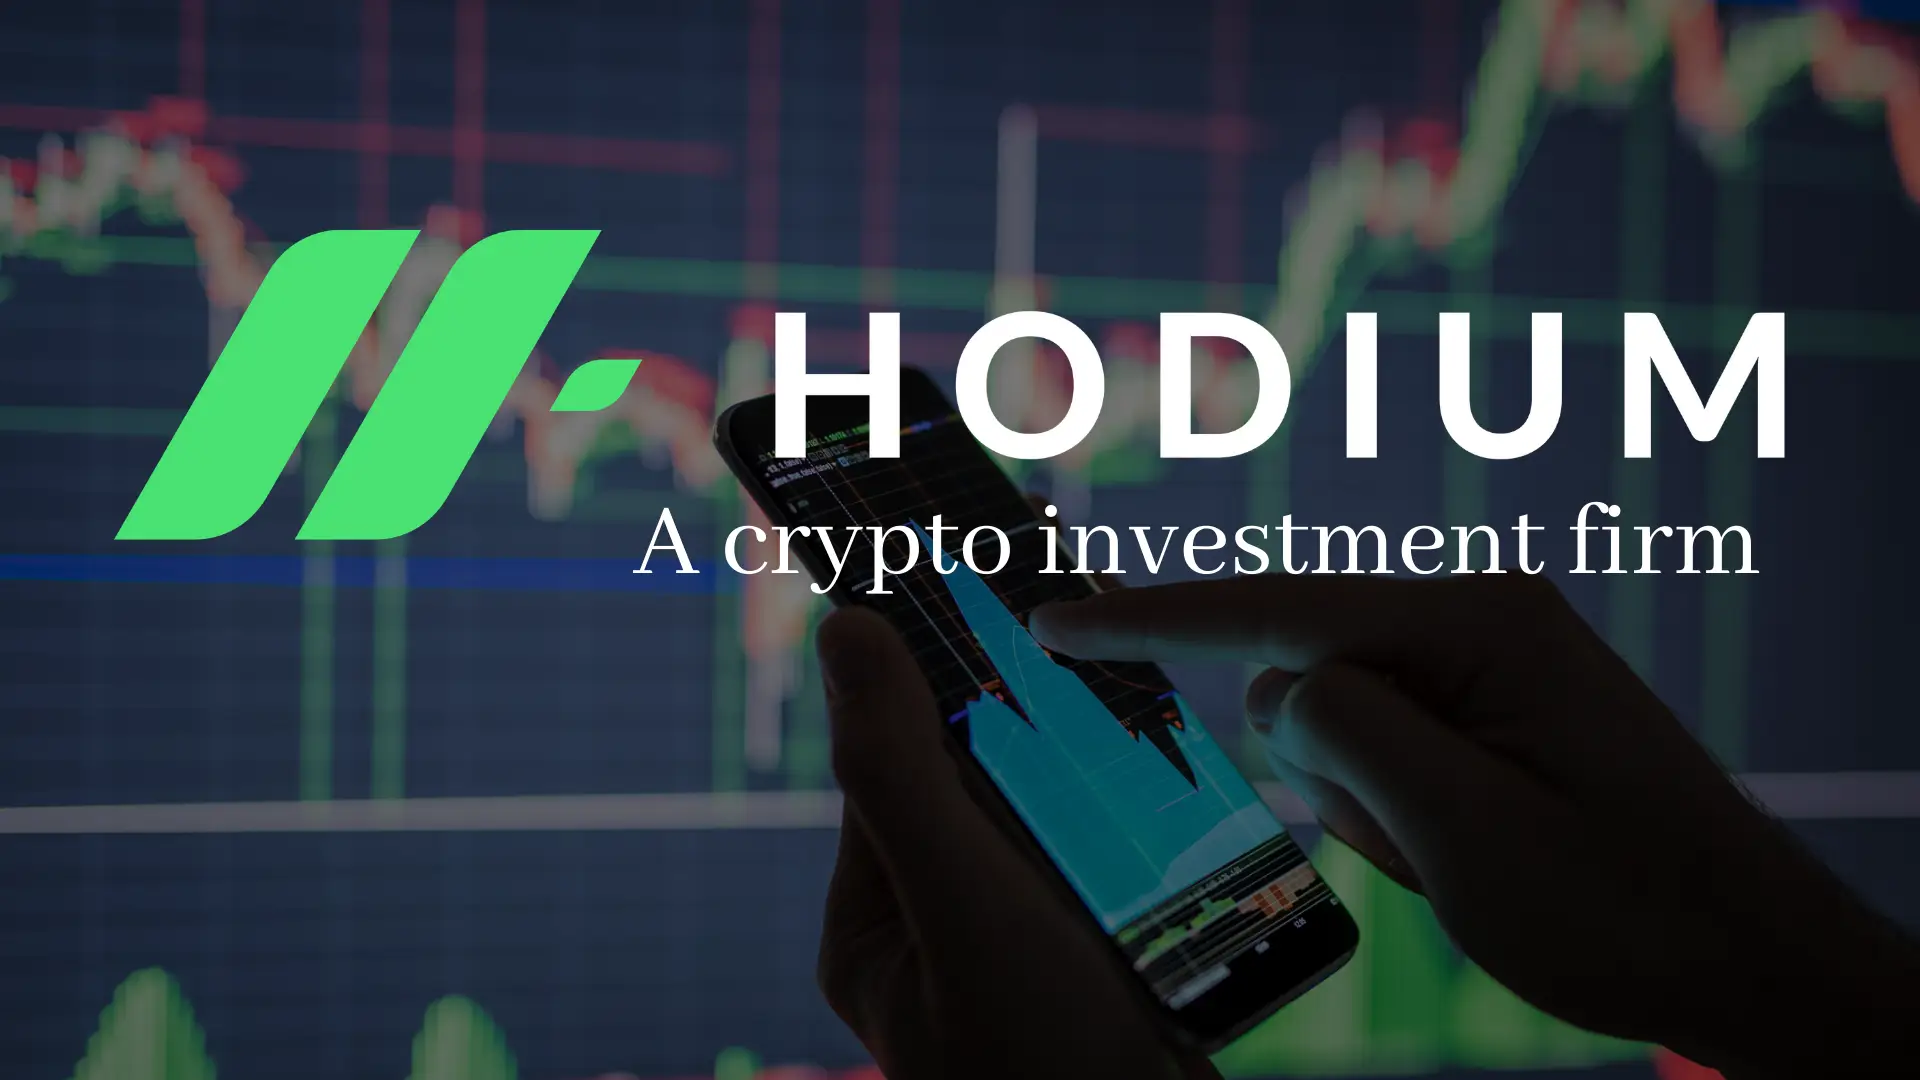 Beat the Crypto Market by Hodium Investment Firm and Generate Daily Returns